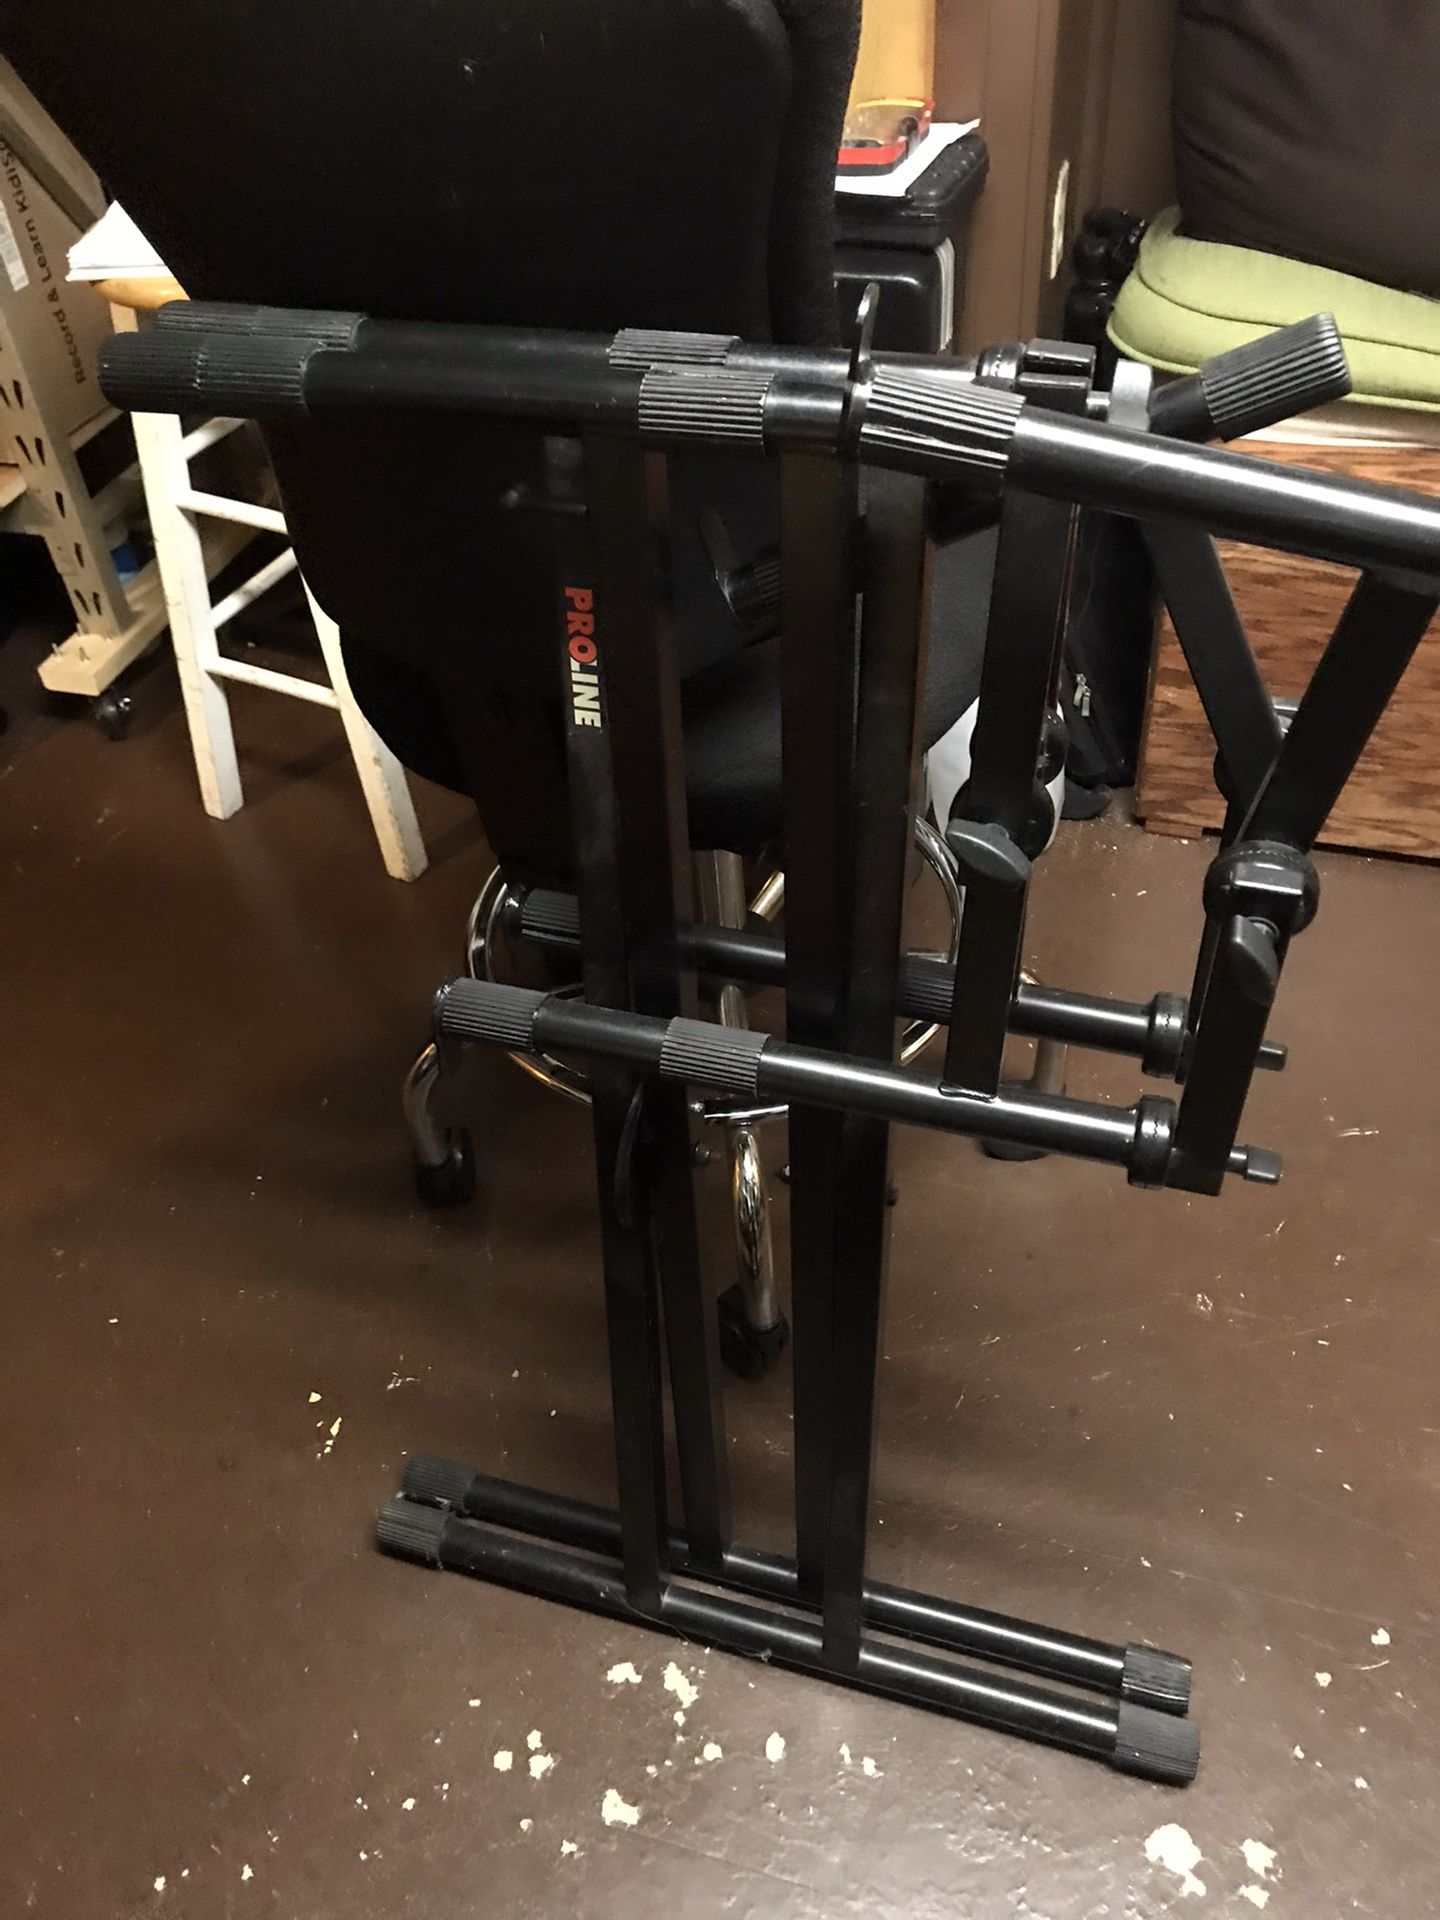 Proline 3 Tier keyboard collapsible stand. Like new.